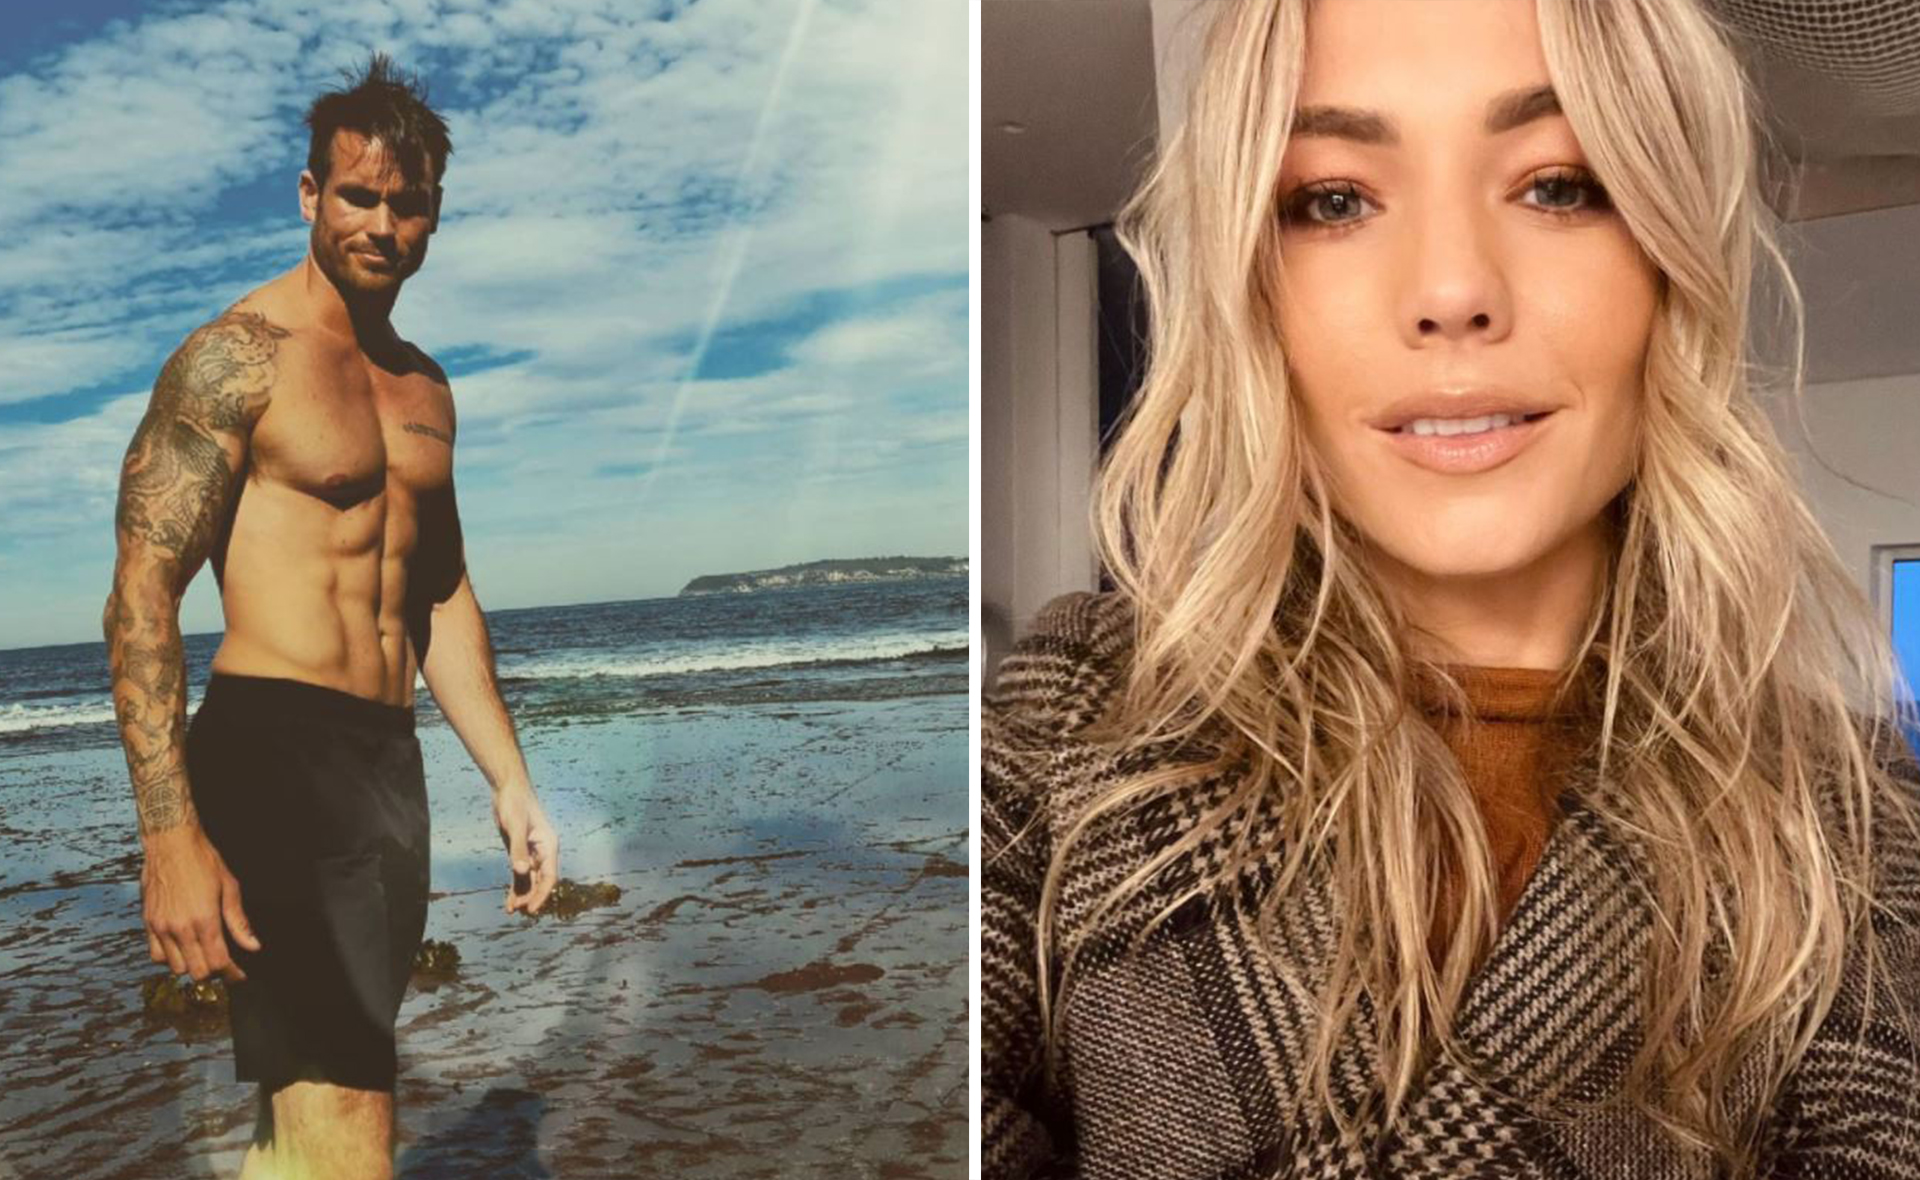 Home & Away’s Sam Frost opens up to her new cast member Nicholas Cartwright as they bond on set